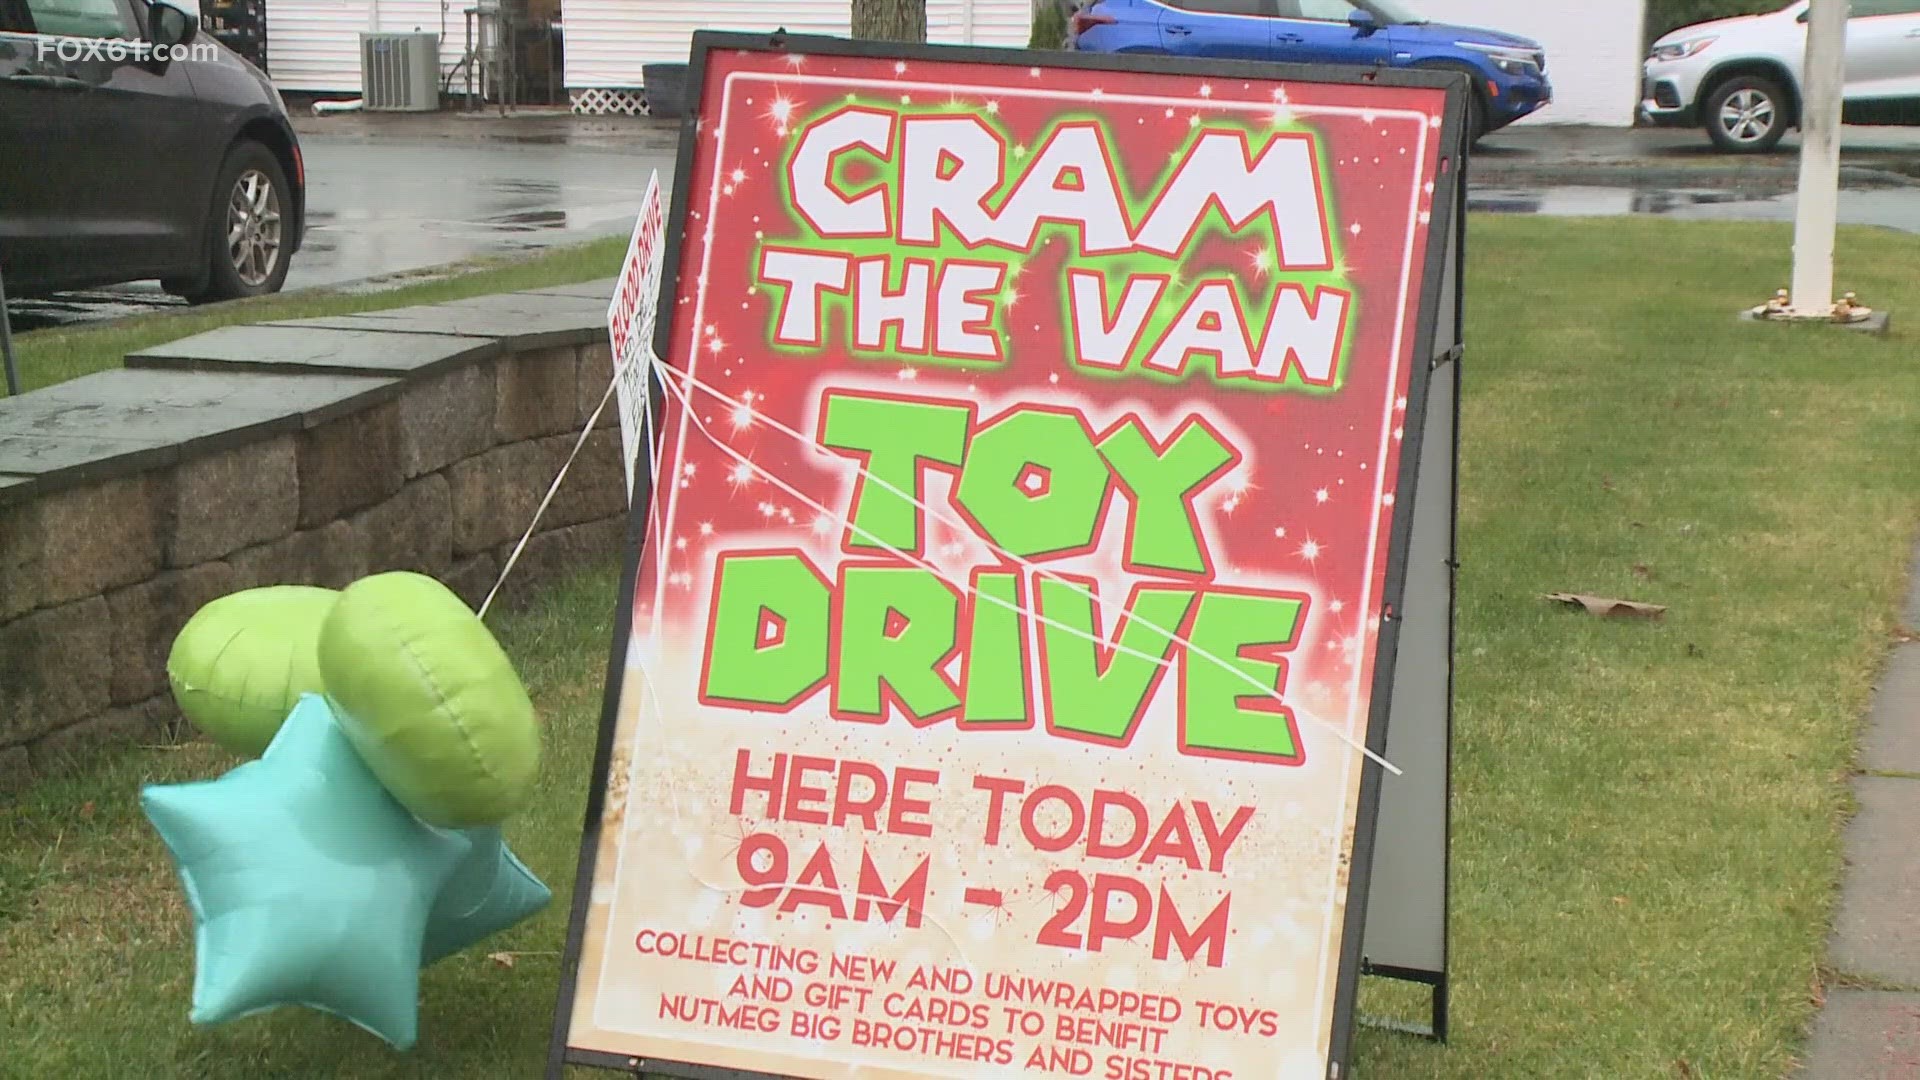 Big Brothers Big Sisters of Connecticut will having its annual Cram the Van toy drive at the Irving Gas Station on Main St. in South Glastonbury on Saturday.